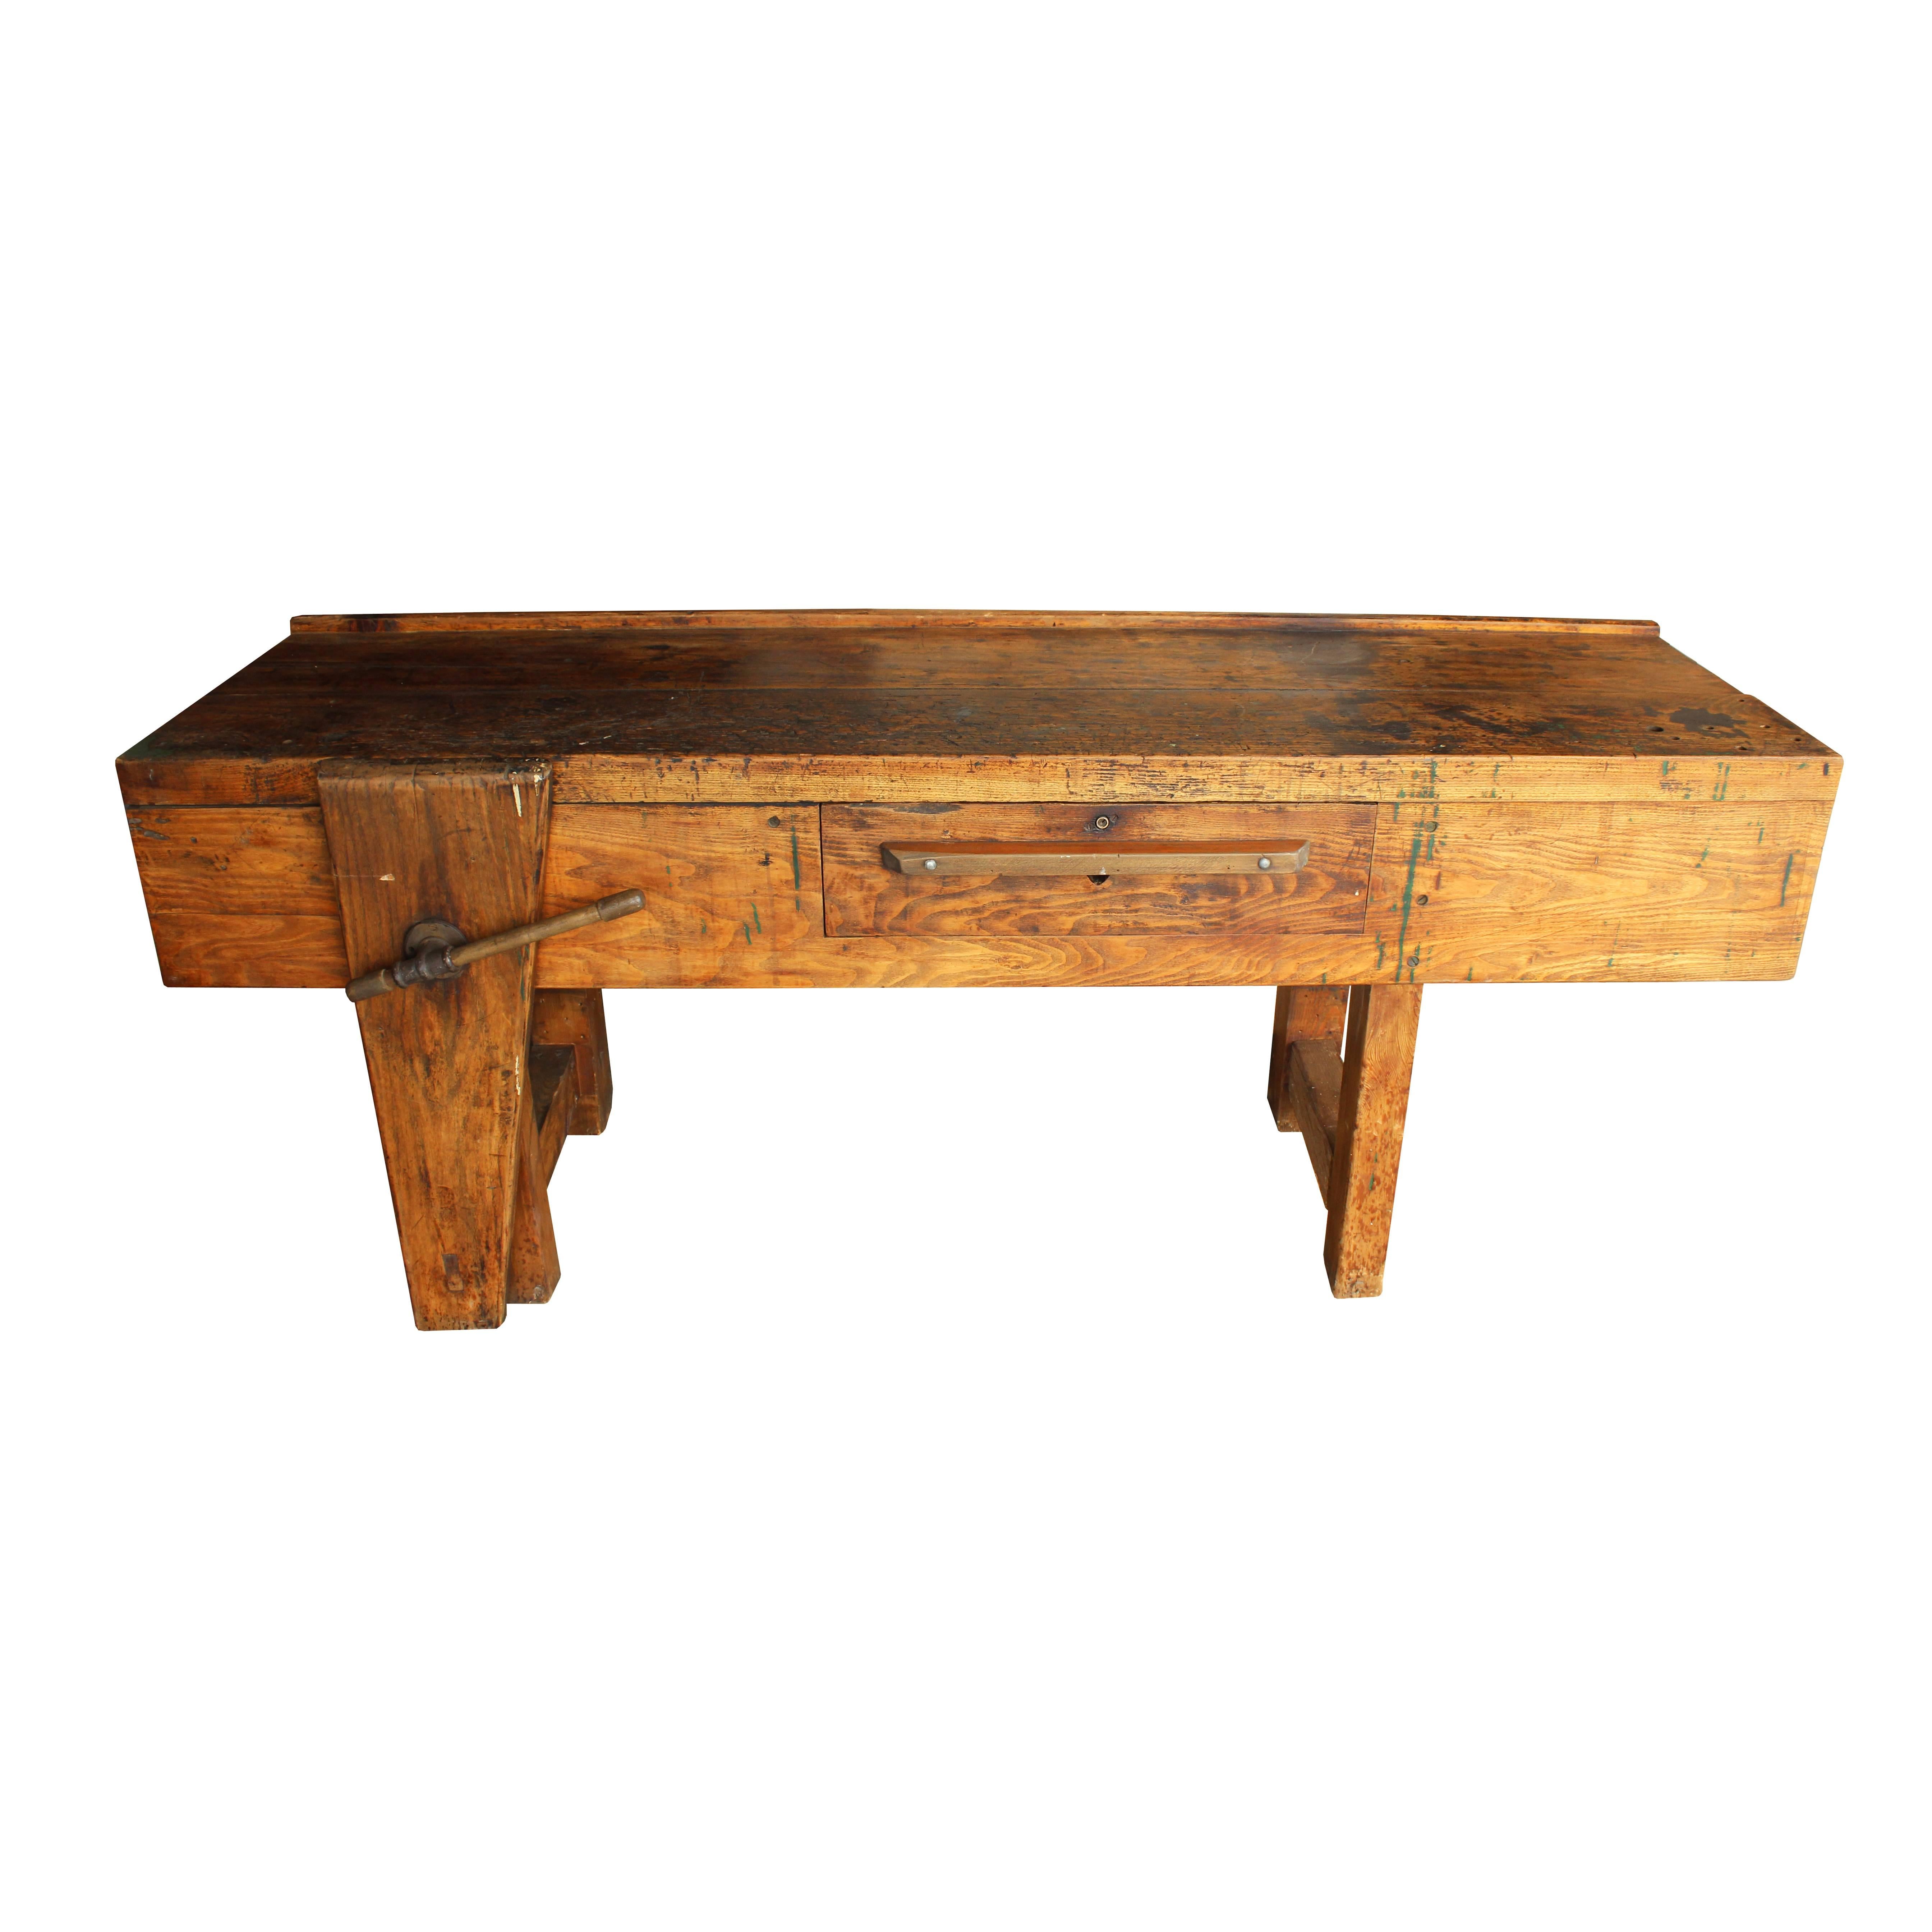 An excellent example of hand-craftsmanship, this simple and solid work bench has an amazing patina that only age and use can create. An amply sized storage drawer and functioning wooden vise add character and utility.